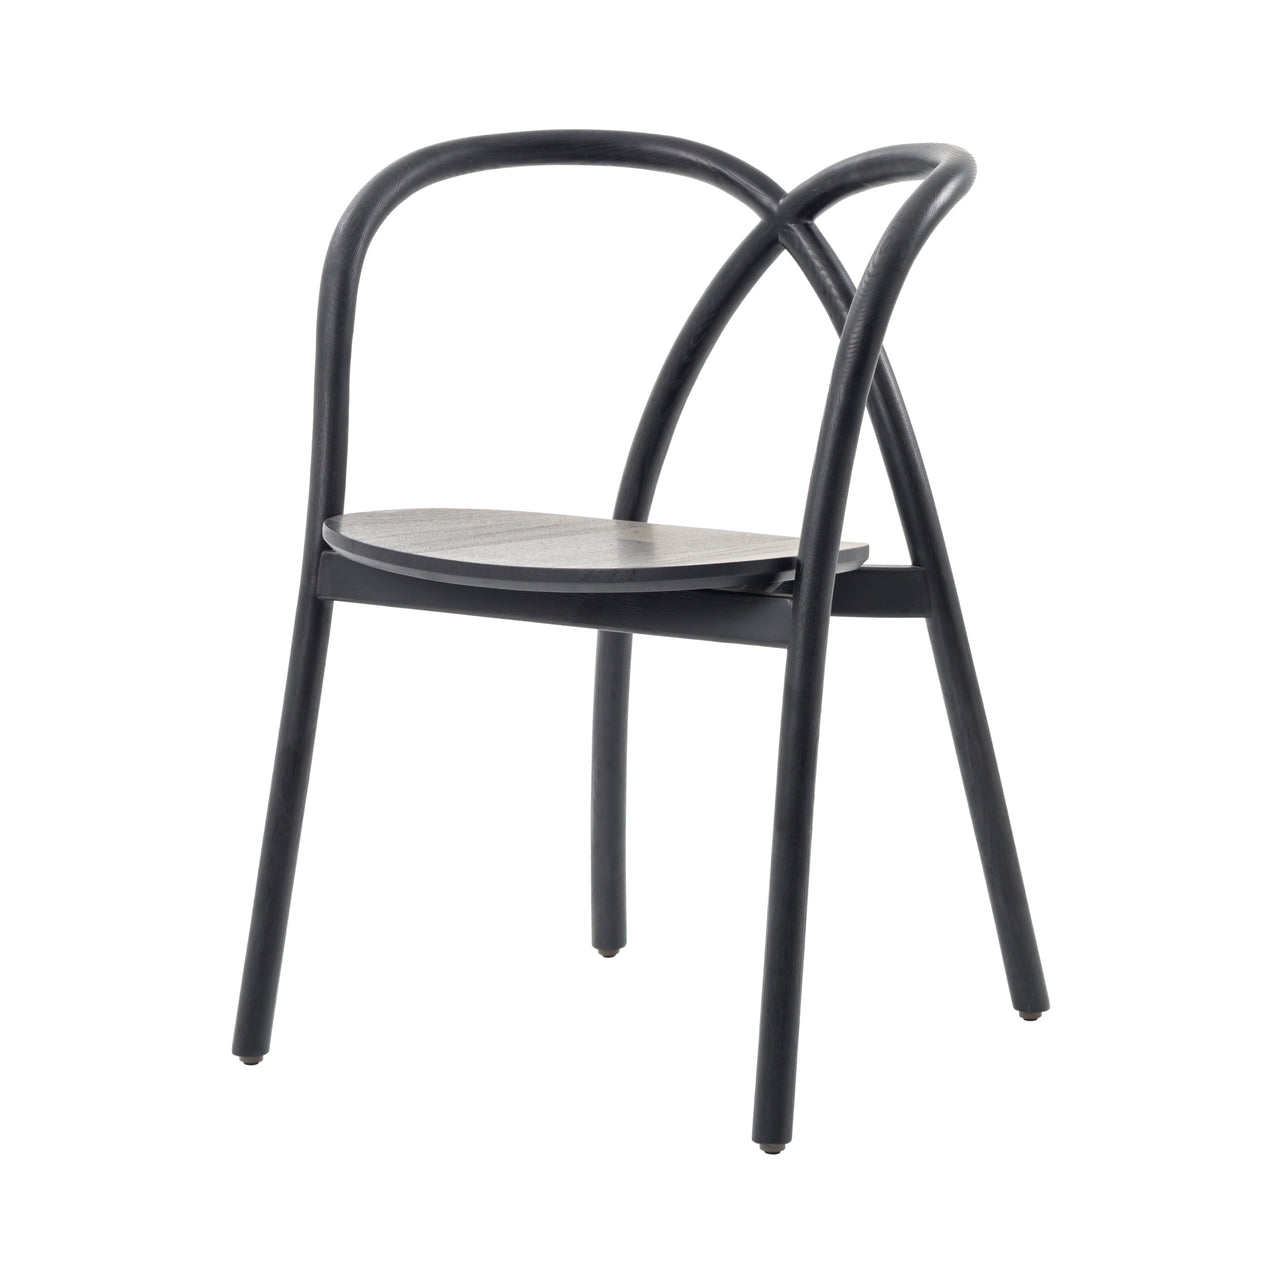 Ming Chair | Buy Stellar Works online at A+R